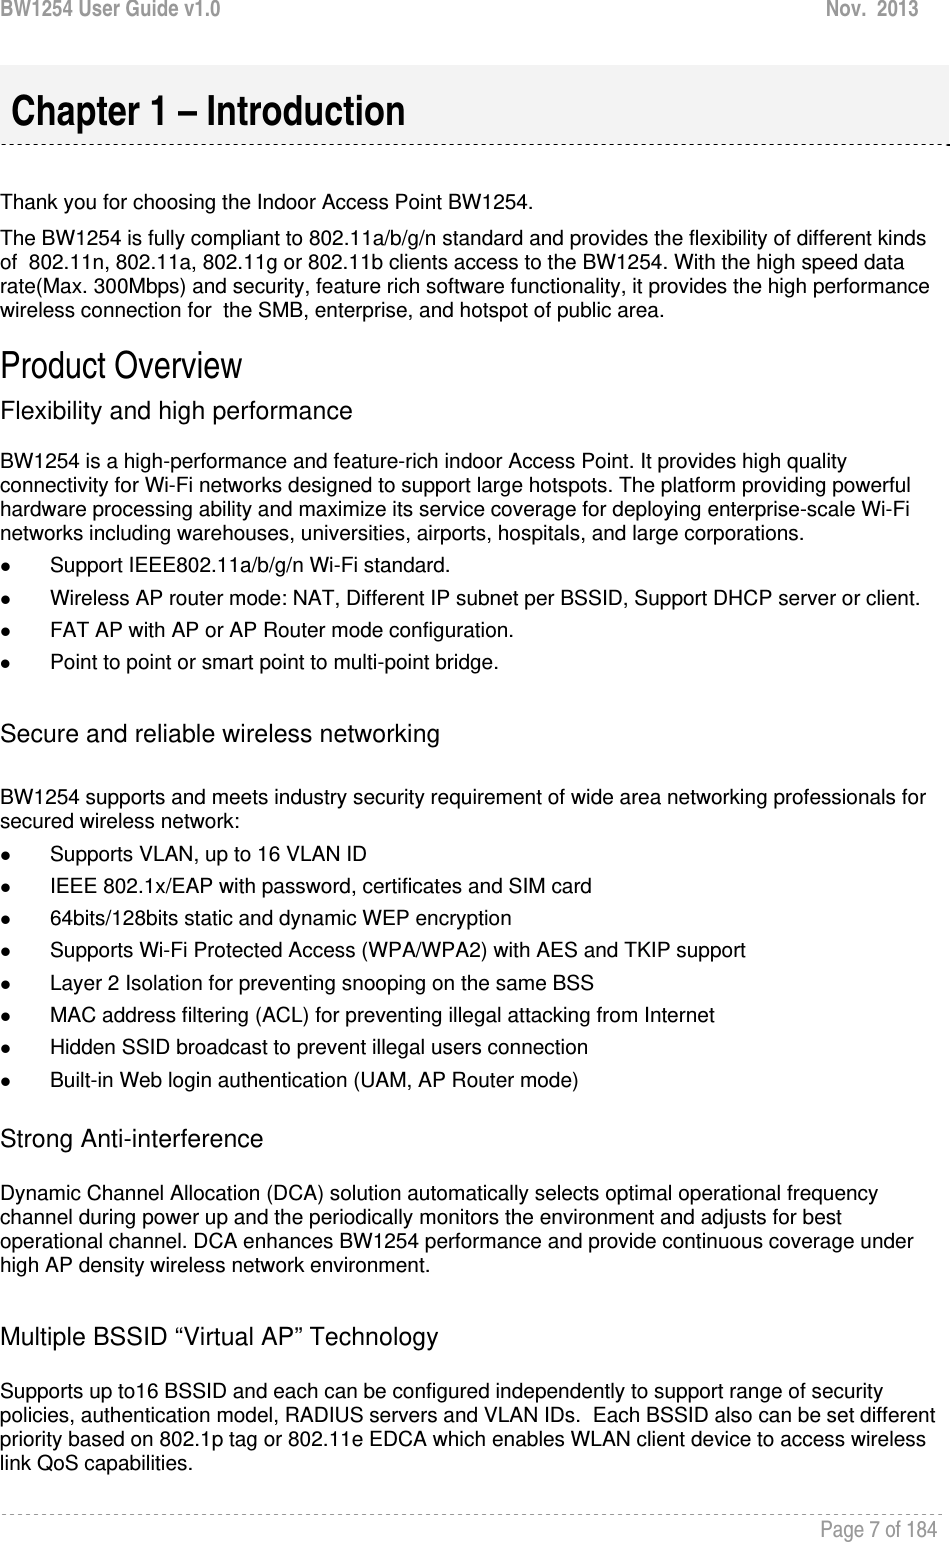 BW1254 User Guide v1.0  Nov.  2013     Page 7 of 184    Thank you for choosing the Indoor Access Point BW1254. The BW1254 is fully compliant to 802.11a/b/g/n standard and provides the flexibility of different kinds of  802.11n, 802.11a, 802.11g or 802.11b clients access to the BW1254. With the high speed data rate(Max. 300Mbps) and security, feature rich software functionality, it provides the high performance wireless connection for  the SMB, enterprise, and hotspot of public area. Product Overview Flexibility and high performance  BW1254 is a high-performance and feature-rich indoor Access Point. It provides high quality connectivity for Wi-Fi networks designed to support large hotspots. The platform providing powerful hardware processing ability and maximize its service coverage for deploying enterprise-scale Wi-Fi networks including warehouses, universities, airports, hospitals, and large corporations. z Support IEEE802.11a/b/g/n Wi-Fi standard. z Wireless AP router mode: NAT, Different IP subnet per BSSID, Support DHCP server or client. z FAT AP with AP or AP Router mode configuration. z Point to point or smart point to multi-point bridge.  Secure and reliable wireless networking  BW1254 supports and meets industry security requirement of wide area networking professionals for secured wireless network:  z Supports VLAN, up to 16 VLAN ID z IEEE 802.1x/EAP with password, certificates and SIM card z 64bits/128bits static and dynamic WEP encryption z Supports Wi-Fi Protected Access (WPA/WPA2) with AES and TKIP support z Layer 2 Isolation for preventing snooping on the same BSS z MAC address filtering (ACL) for preventing illegal attacking from Internet z Hidden SSID broadcast to prevent illegal users connection z Built-in Web login authentication (UAM, AP Router mode)  Strong Anti-interference  Dynamic Channel Allocation (DCA) solution automatically selects optimal operational frequency channel during power up and the periodically monitors the environment and adjusts for best operational channel. DCA enhances BW1254 performance and provide continuous coverage under high AP density wireless network environment.  Multiple BSSID “Virtual AP” Technology  Supports up to16 BSSID and each can be configured independently to support range of security policies, authentication model, RADIUS servers and VLAN IDs.  Each BSSID also can be set different priority based on 802.1p tag or 802.11e EDCA which enables WLAN client device to access wireless link QoS capabilities.   Chapter 1 – Introduction 